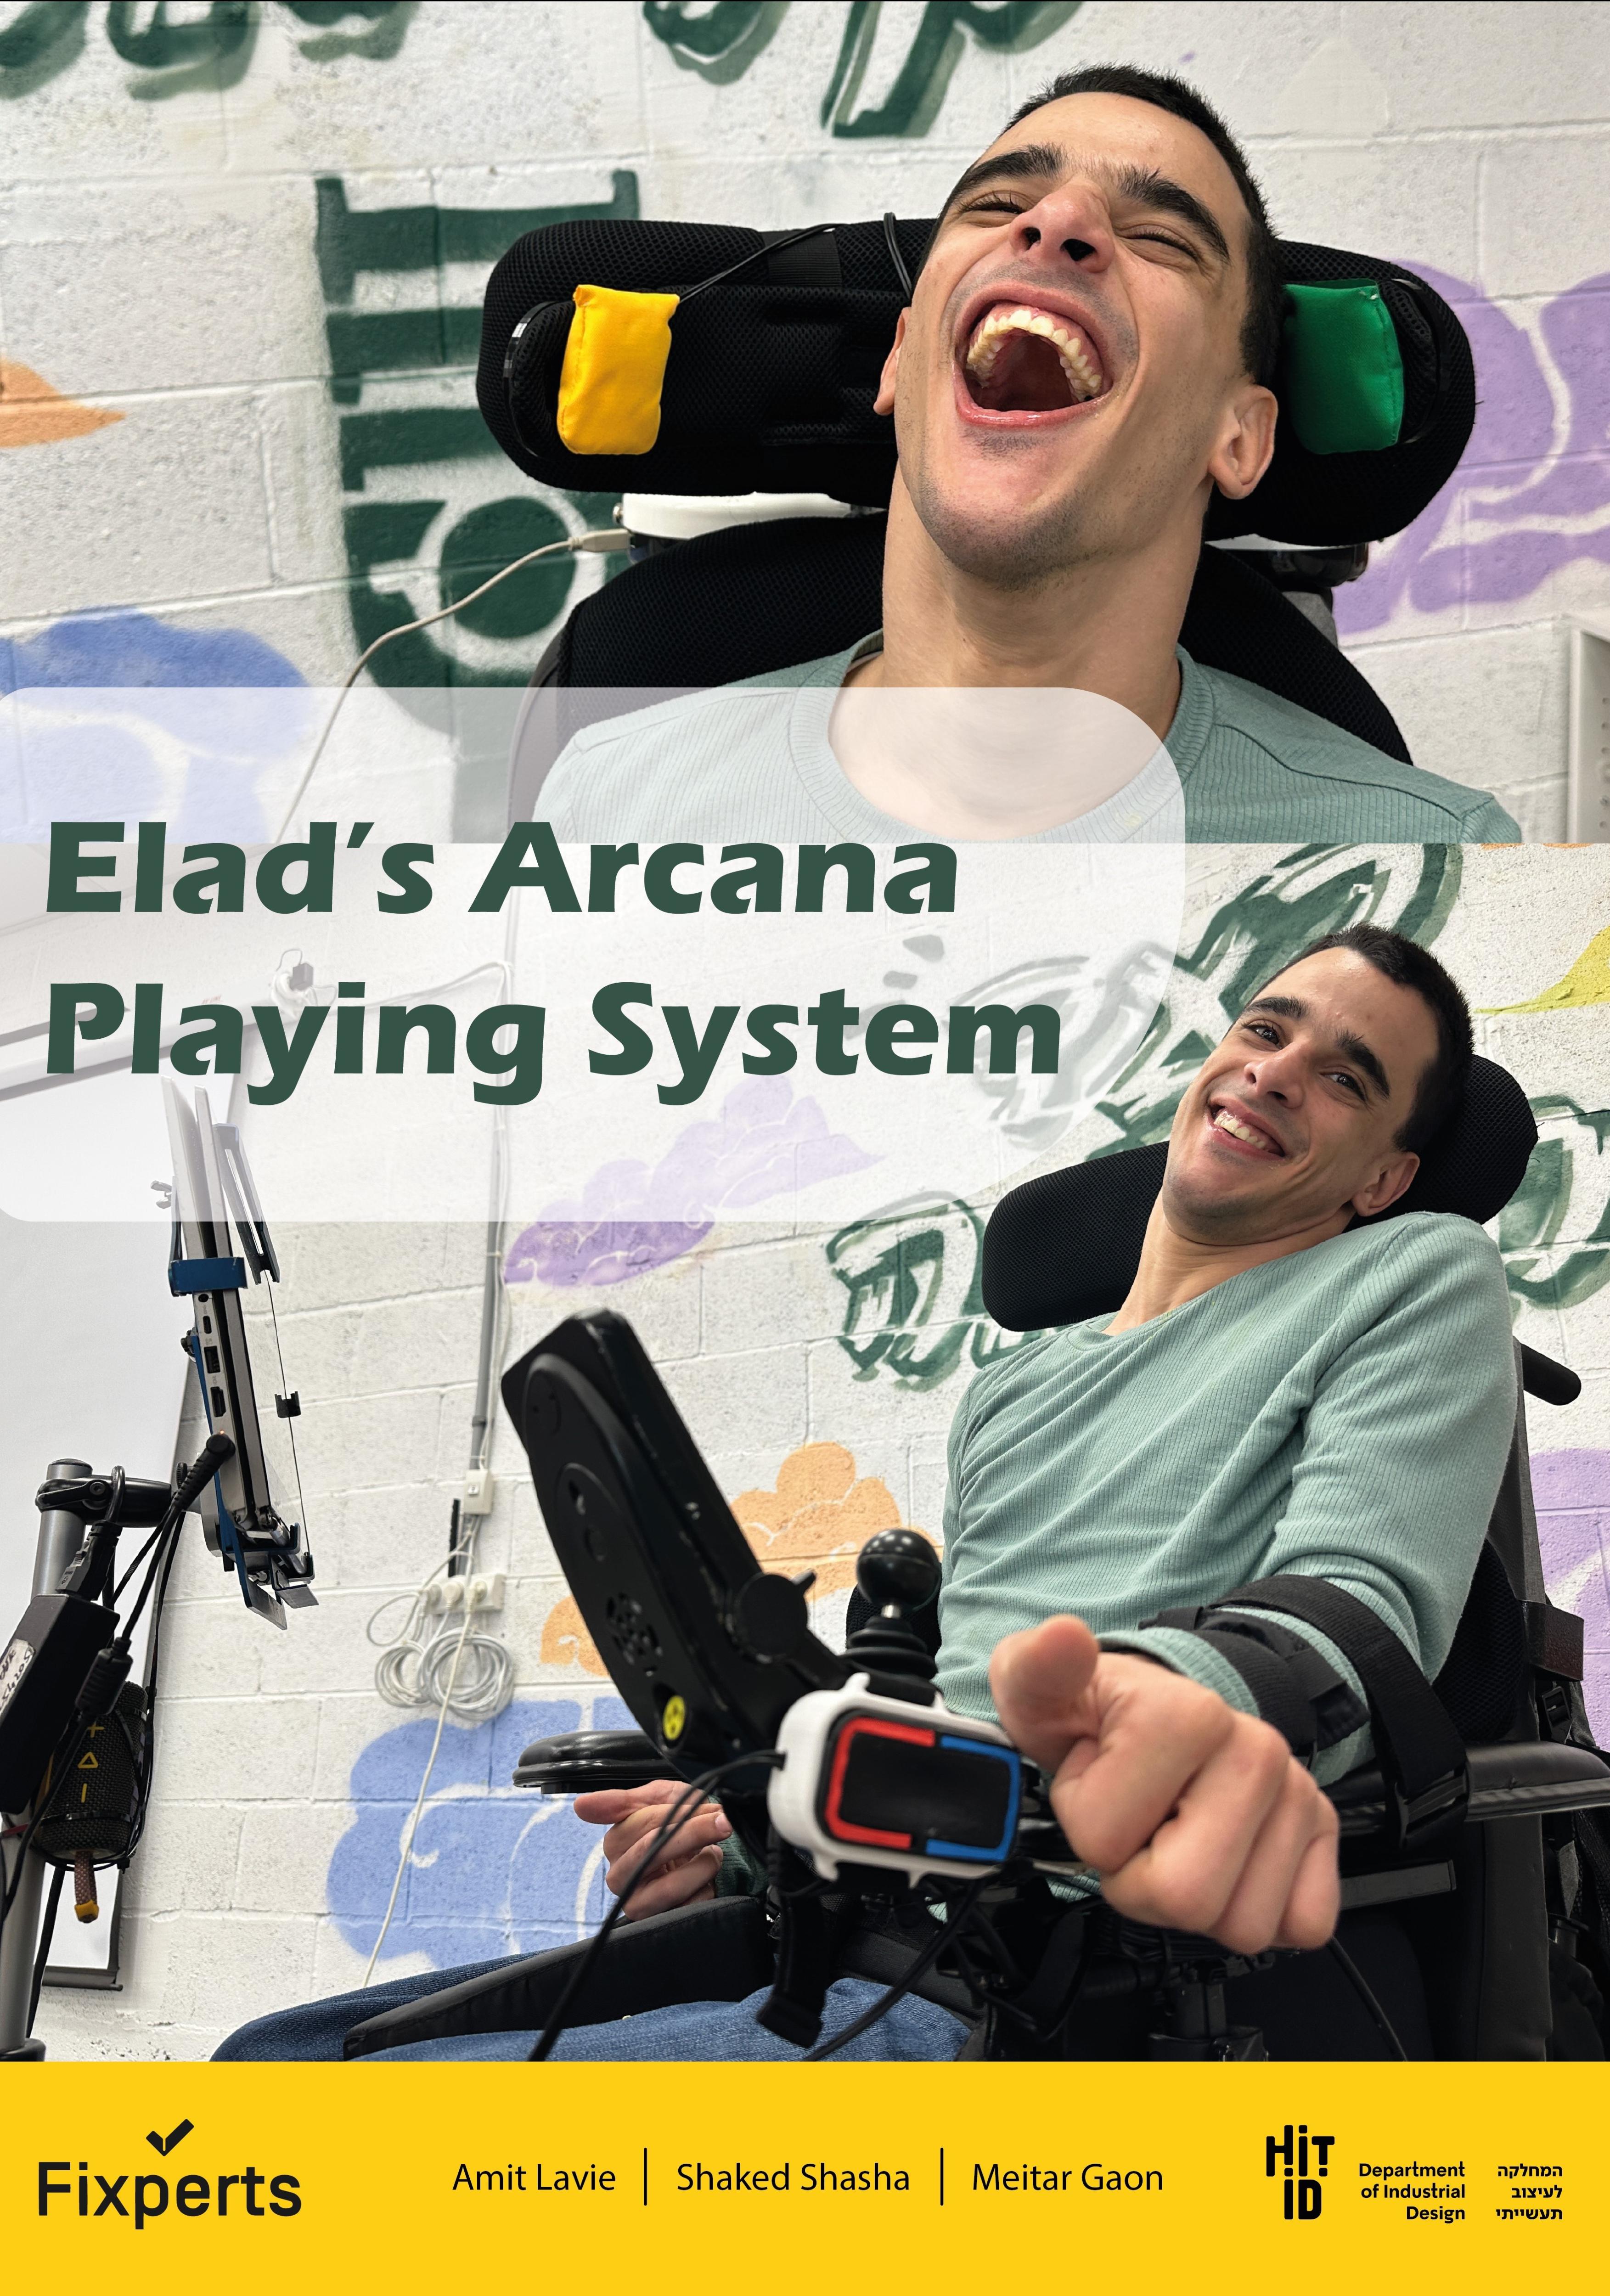 Elad's Arcana playing system Poster-01.jpg